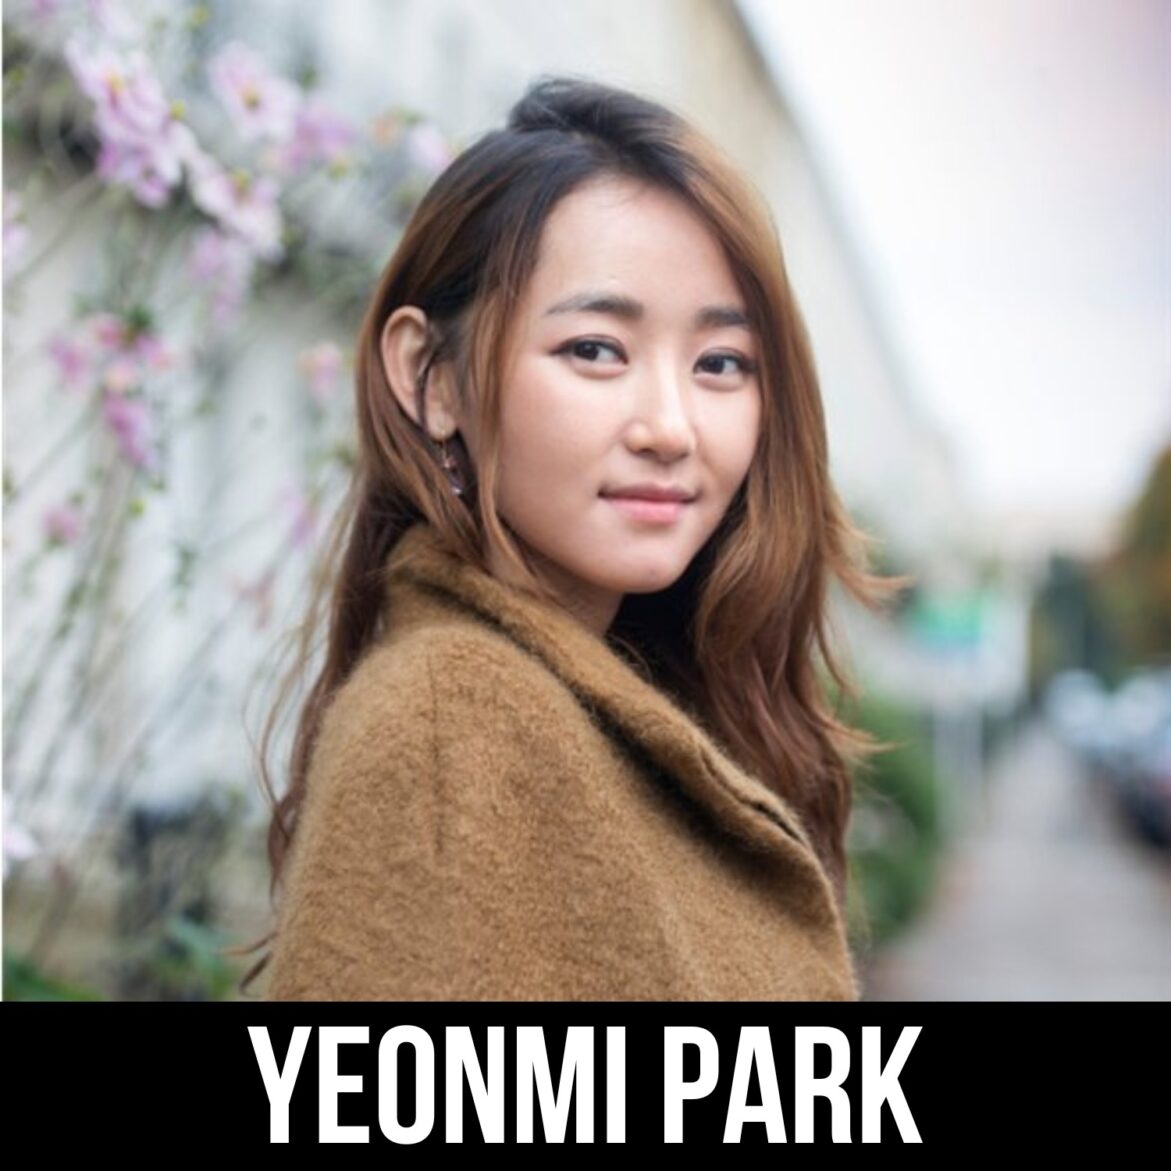 Black Podcasting - #247 Yeonmi Park - A North Korean's Warning To The West